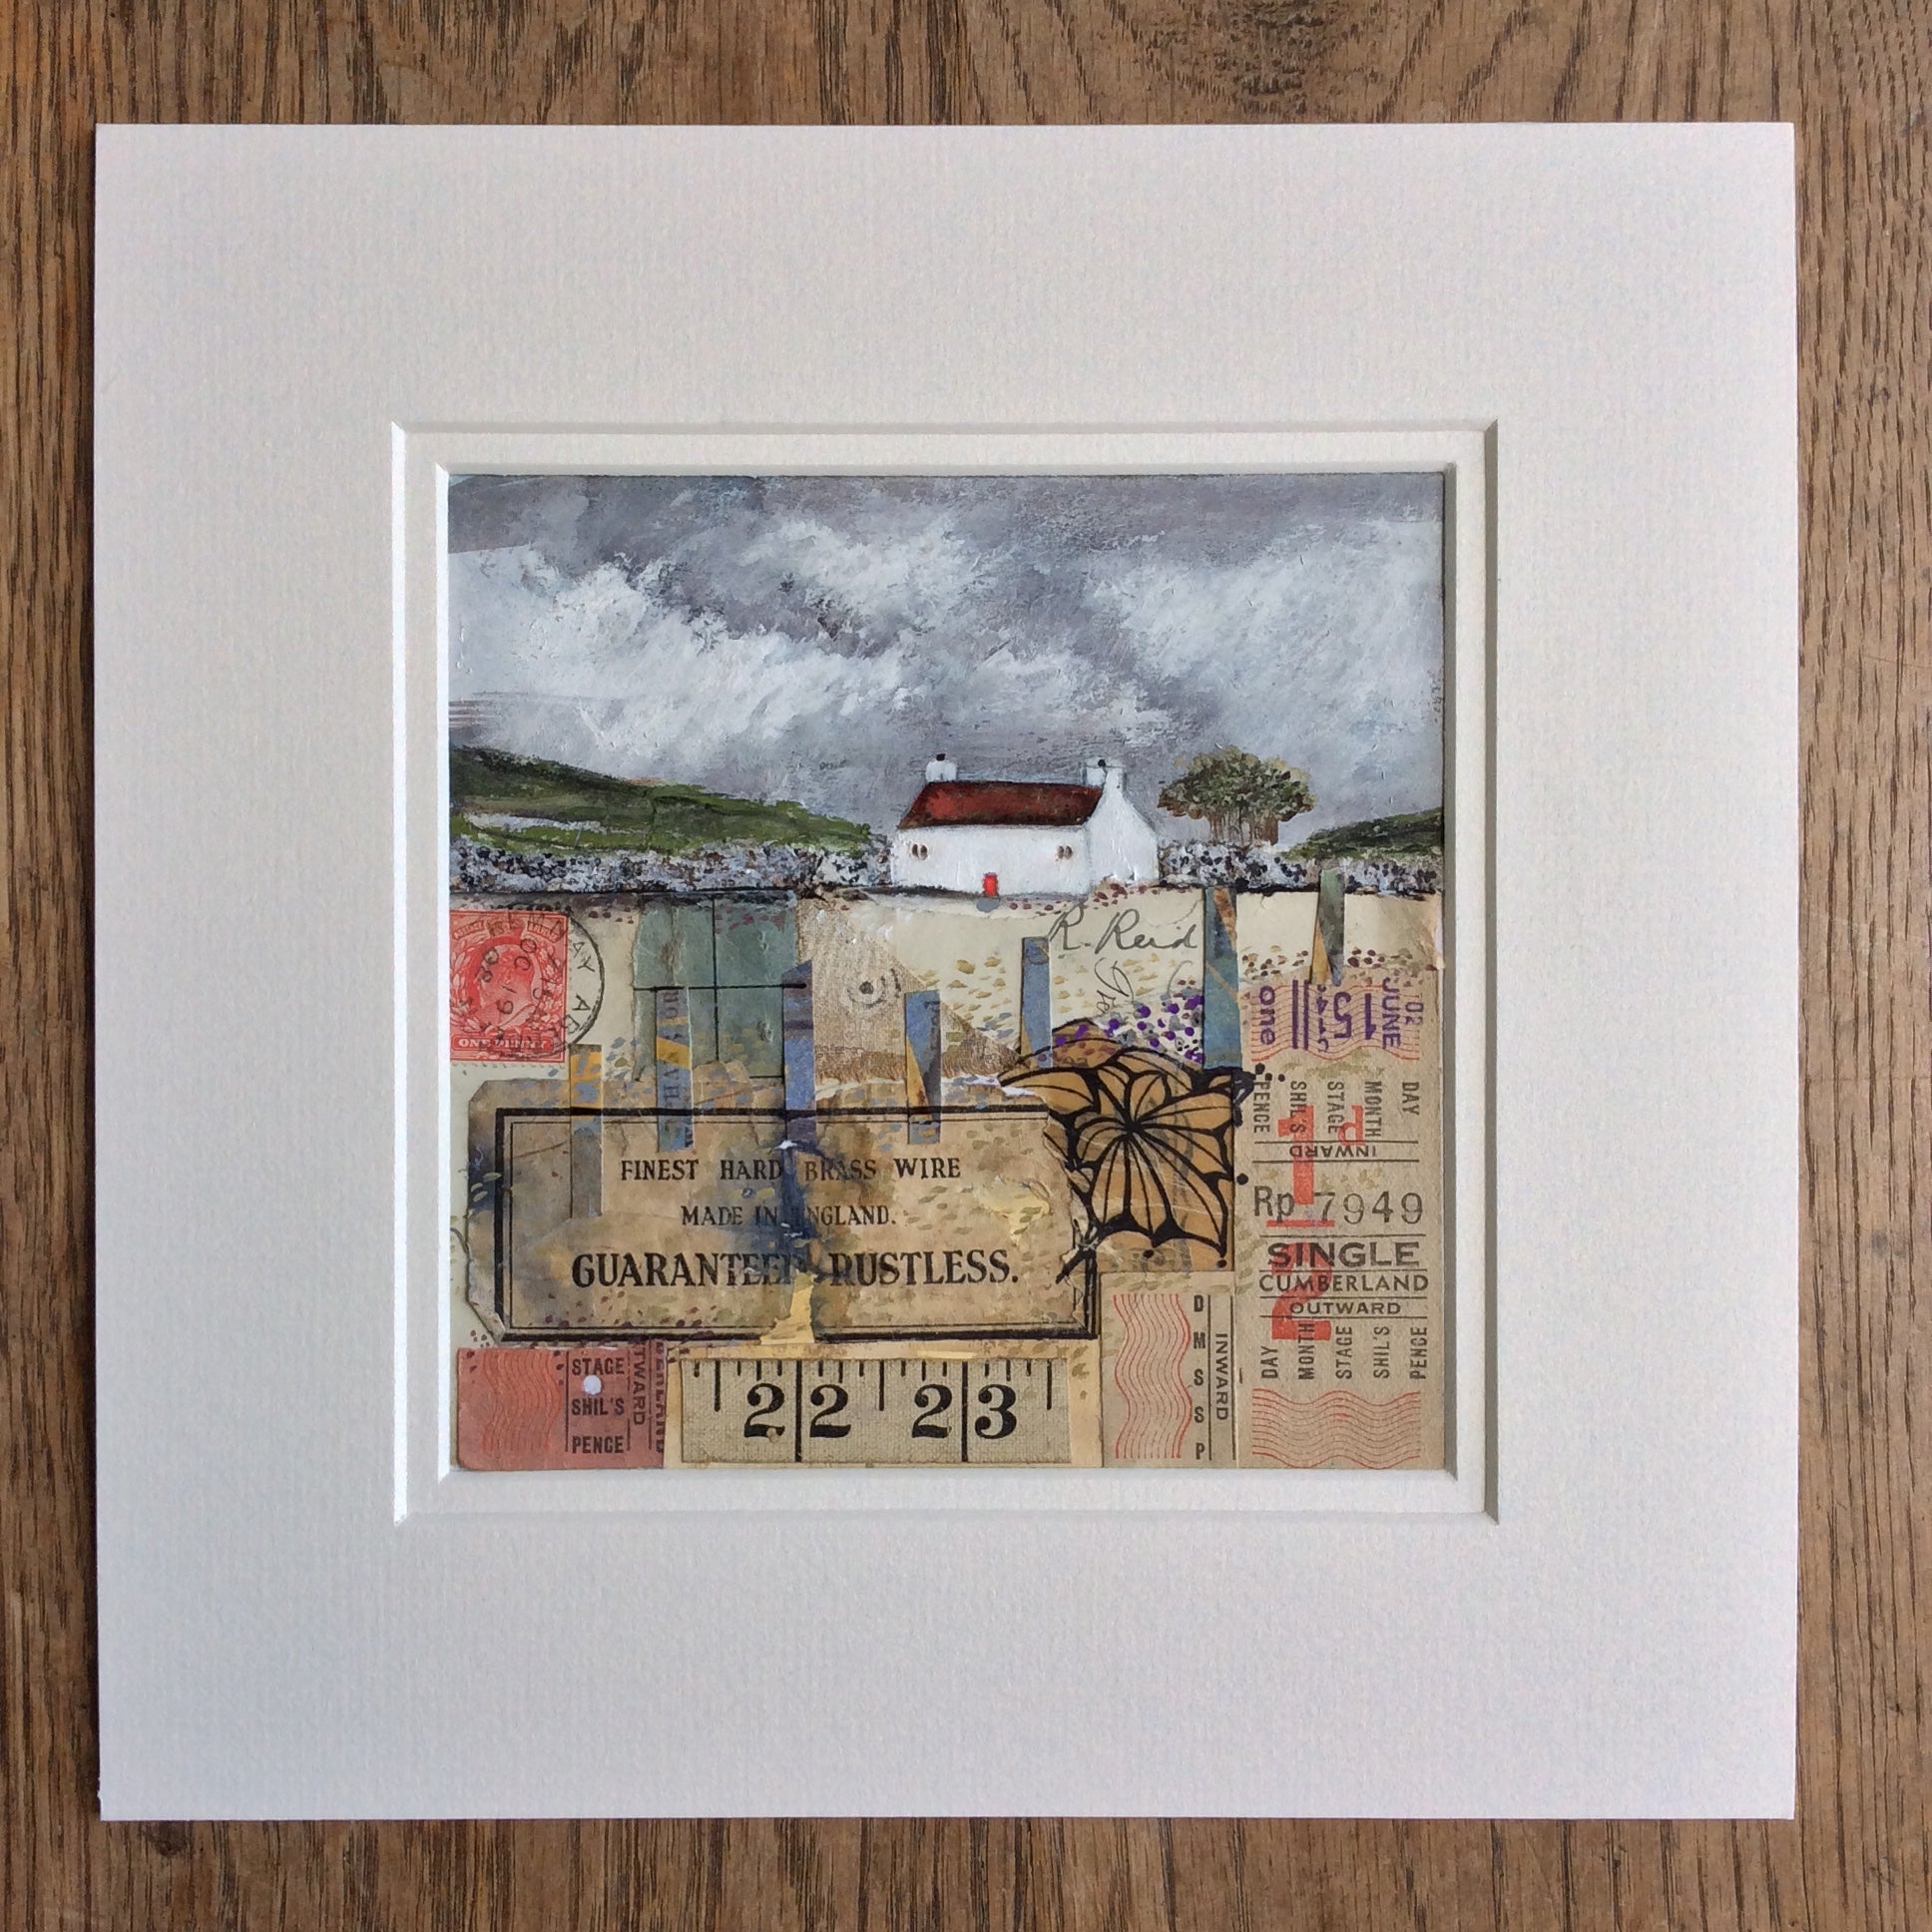 Mixed Media Art By Louise O'Hara “Brass Cottage”